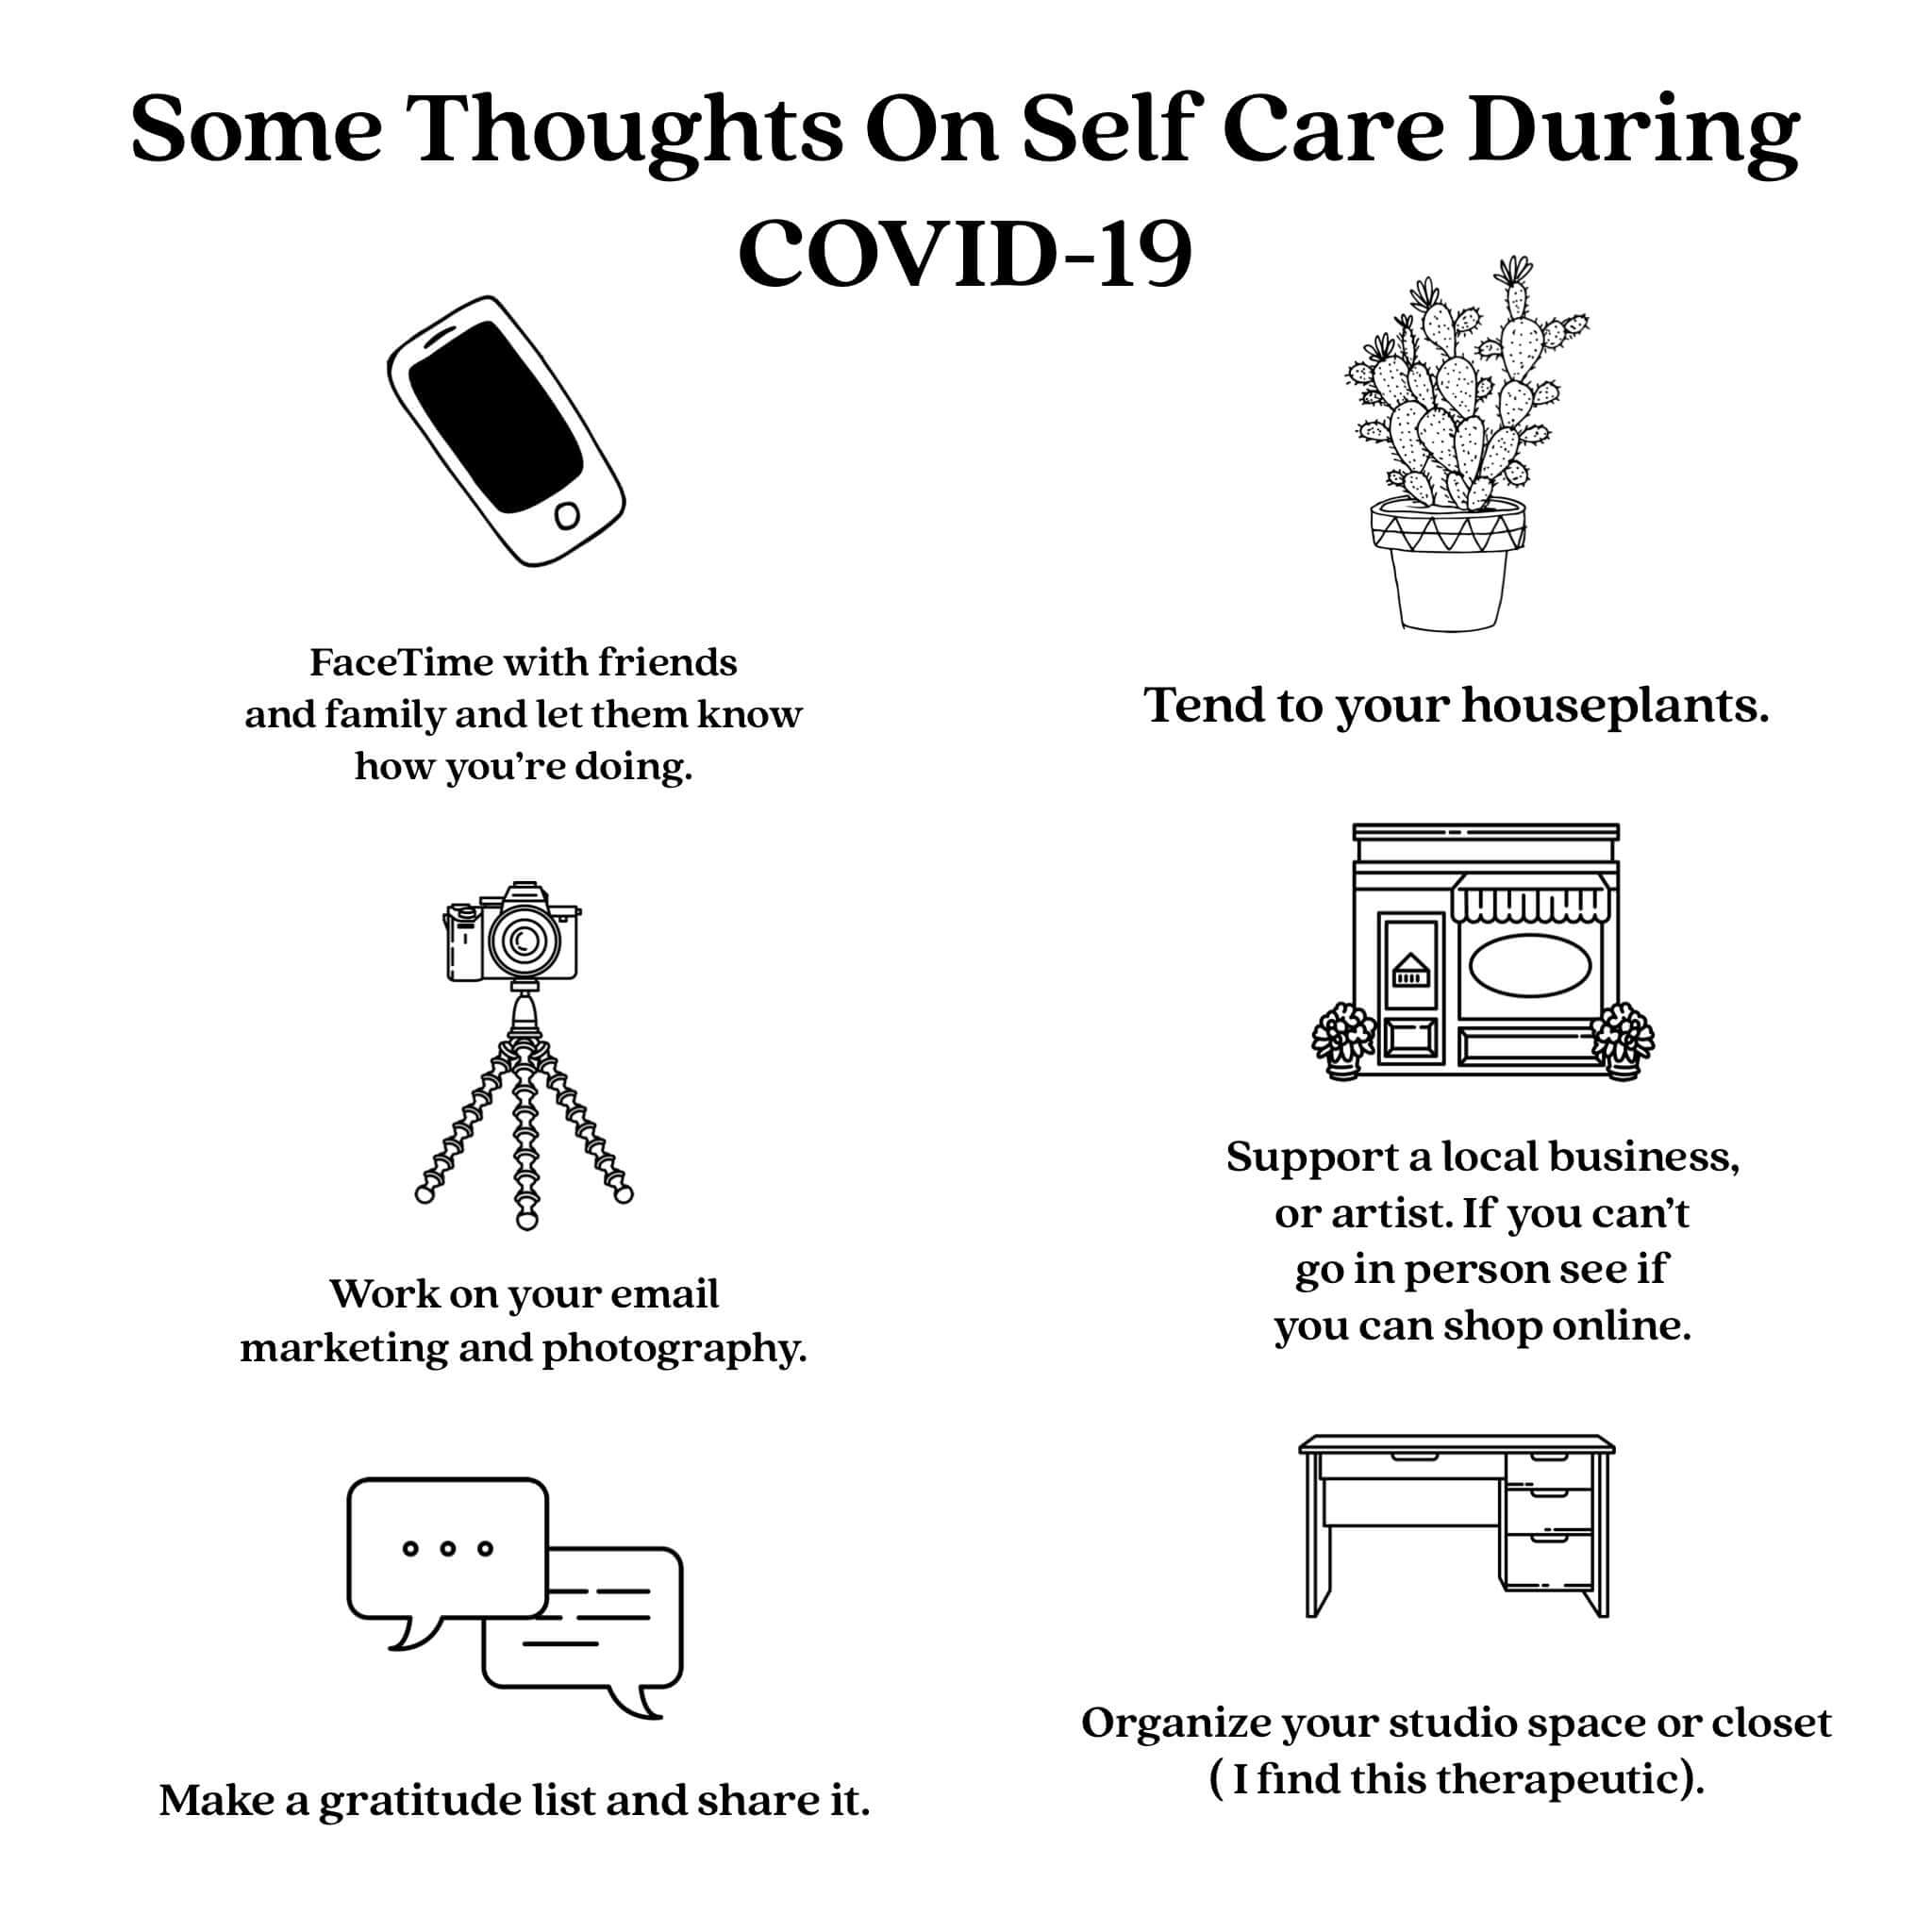 STAYING PRODUCTIVE AND SELF-CARE DURING COVID-19